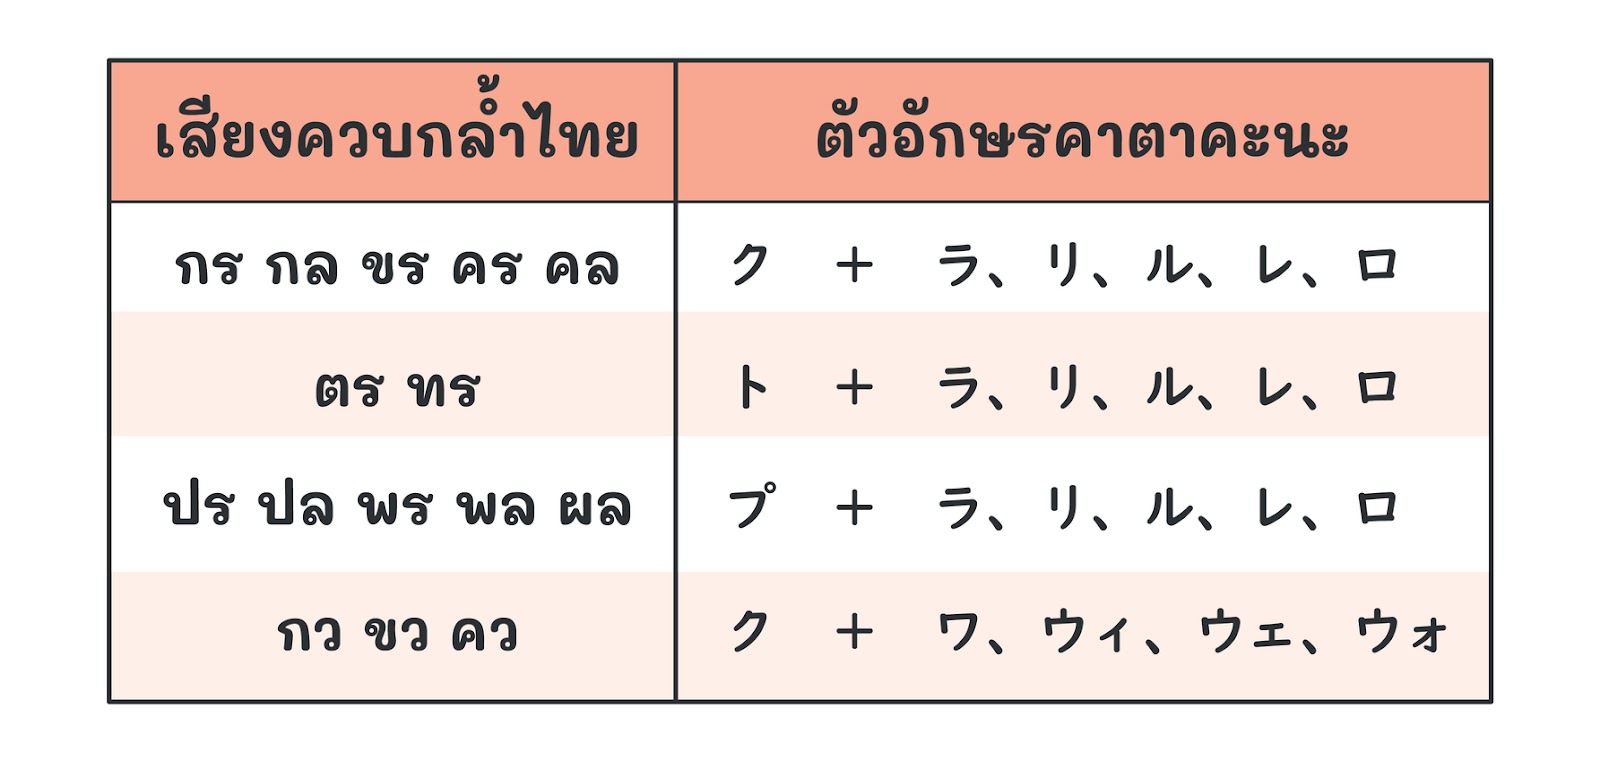 this table shows how to change Thai consonant blend into Katakana characters.